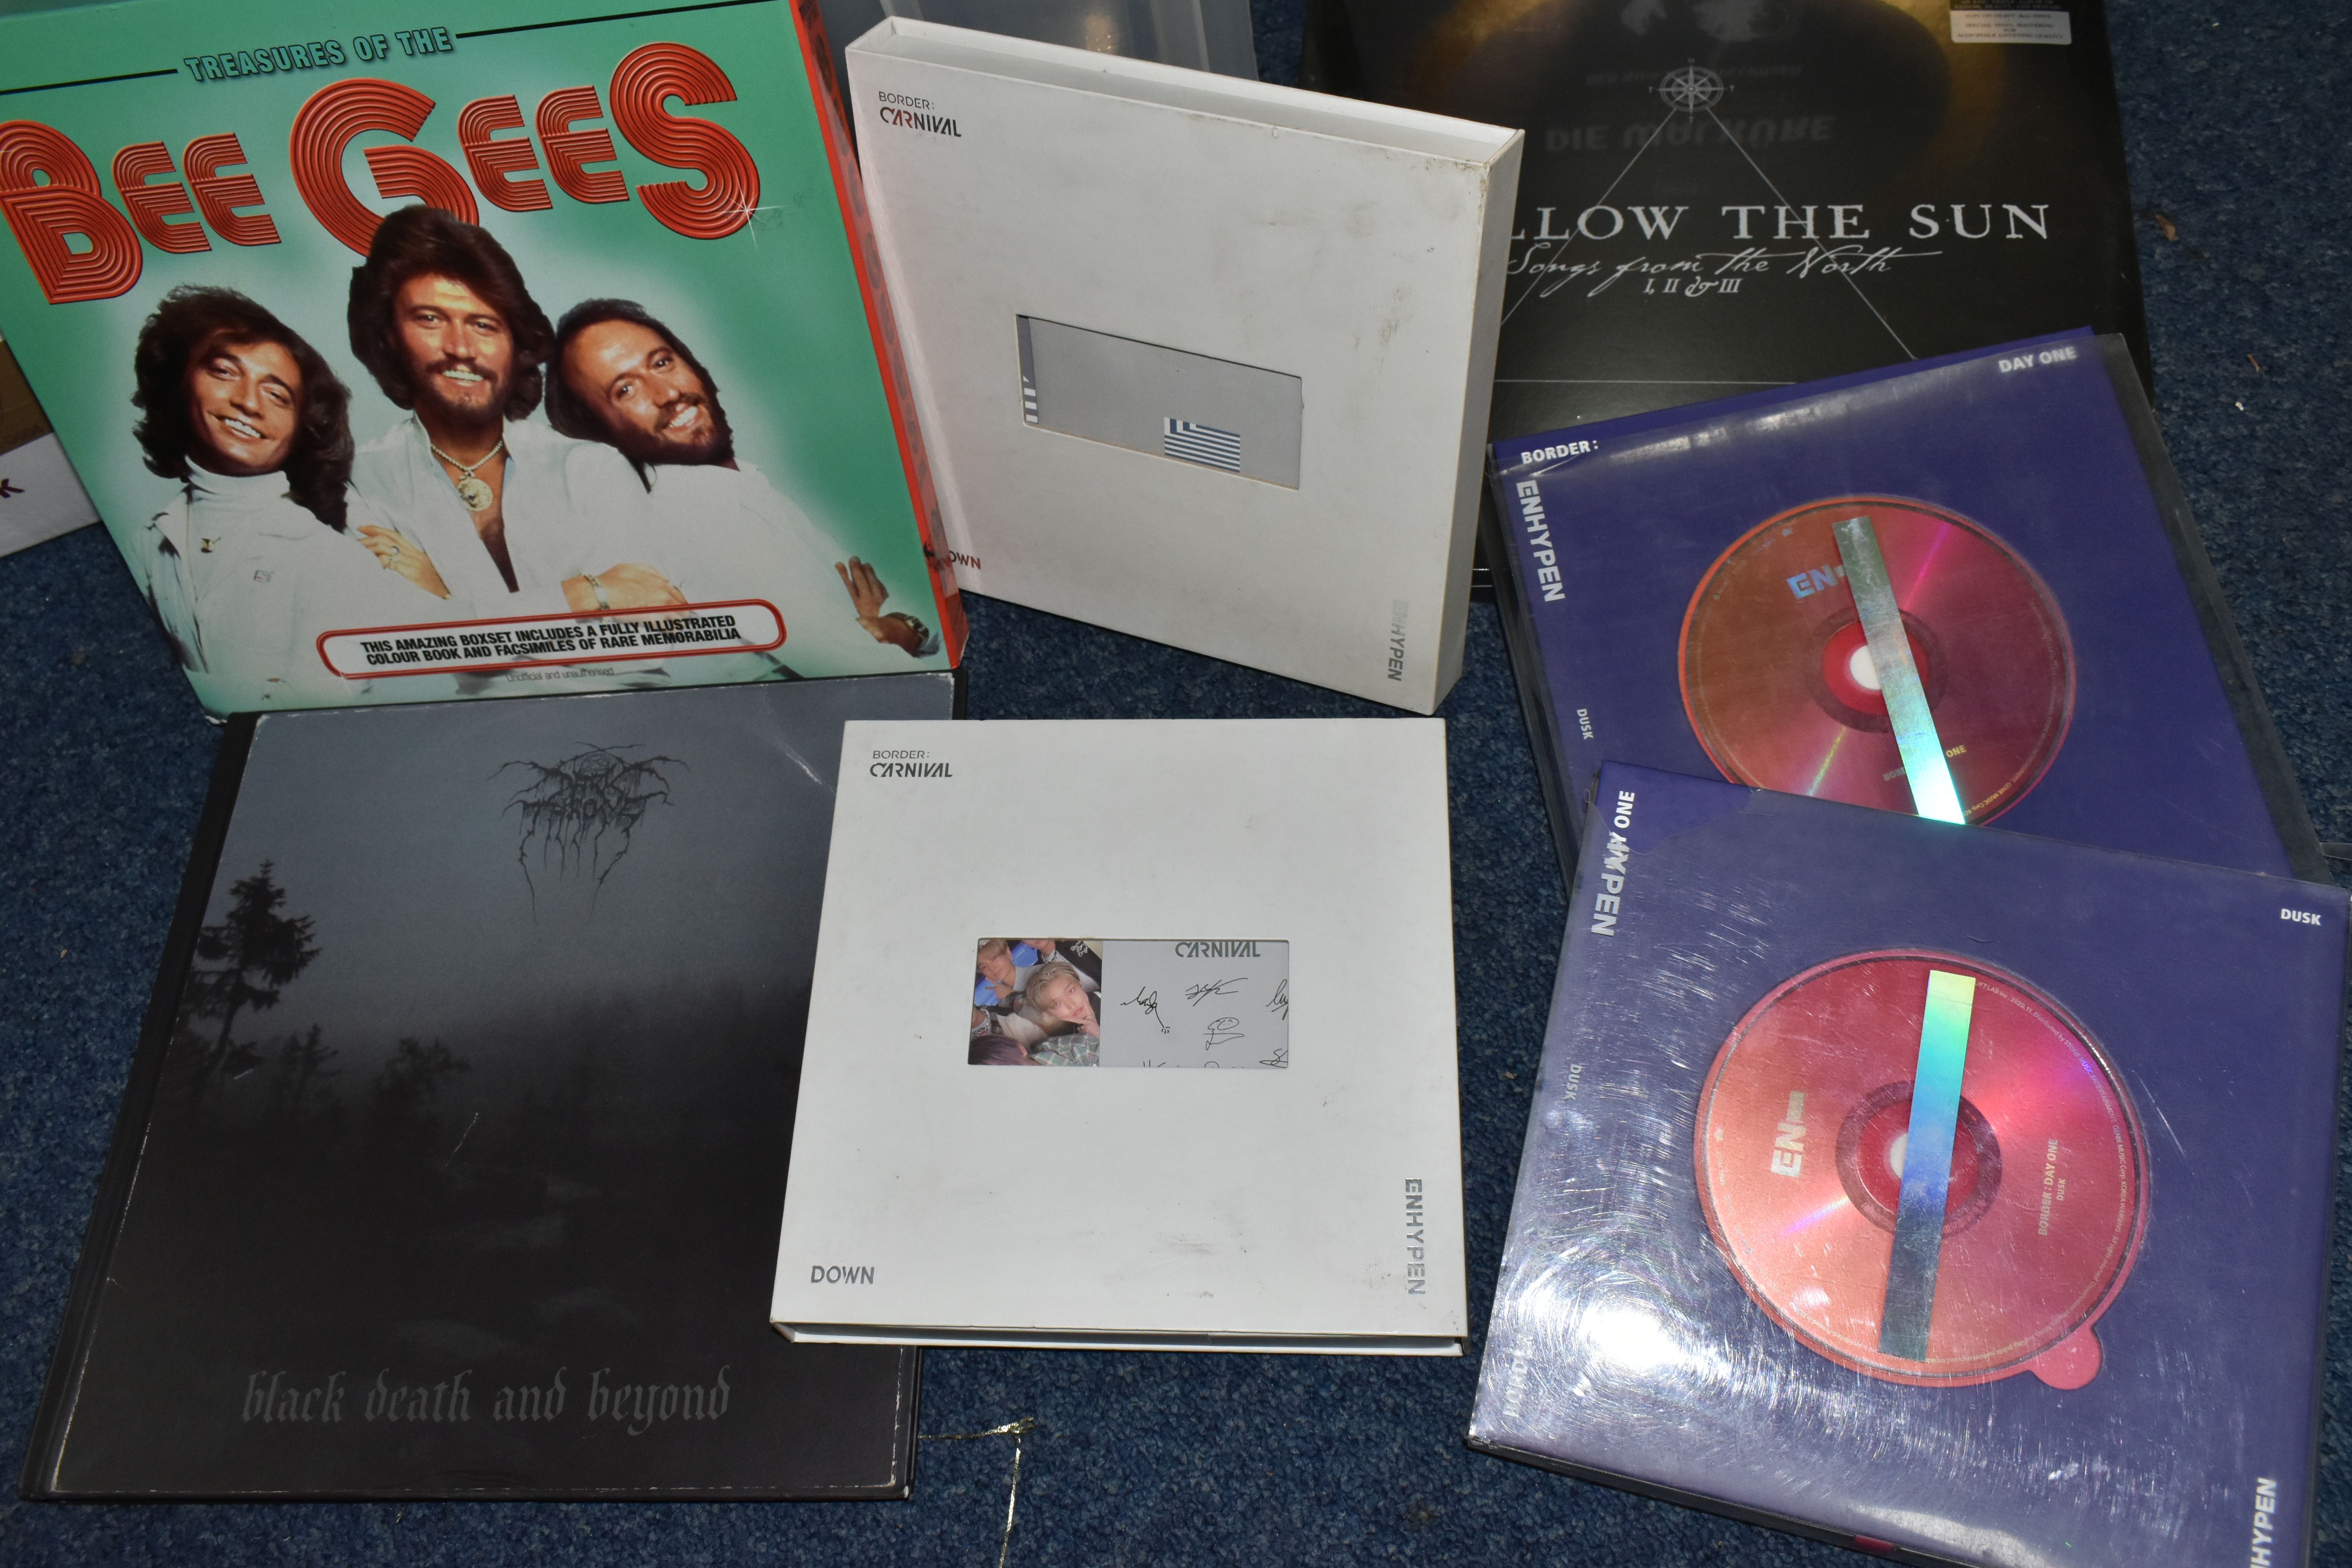 A SELECTION OF SPECIAL EDITION MUSIC MEMORABILIA, pieces include 'Treasures of the Beegees' book - Image 2 of 4